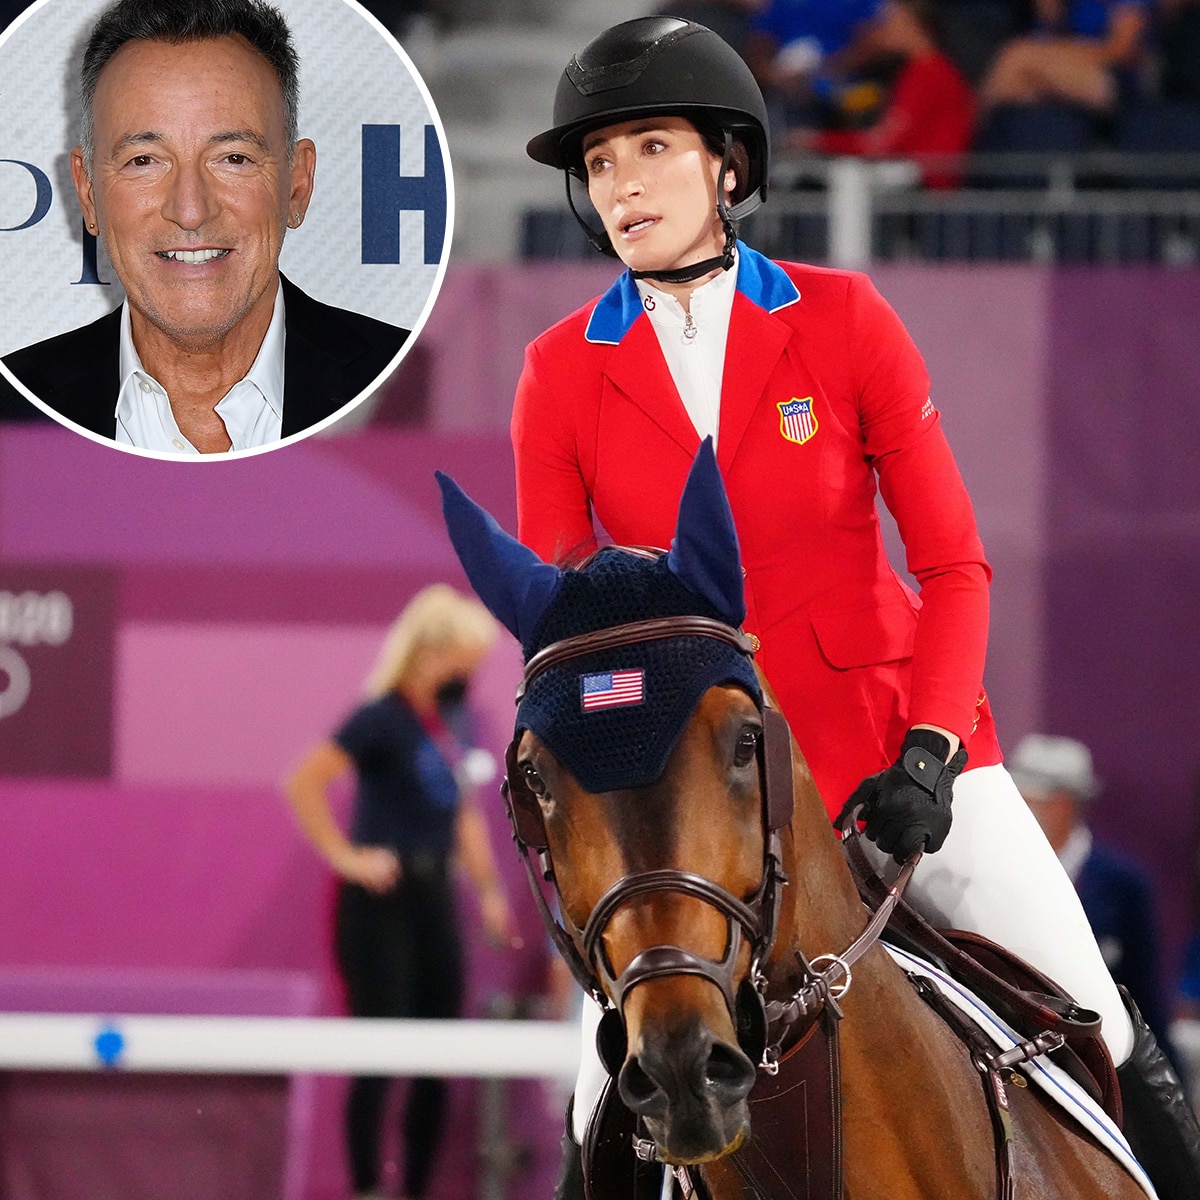 Jessica Springsteen Makes an Olympic Return With First Medal Win